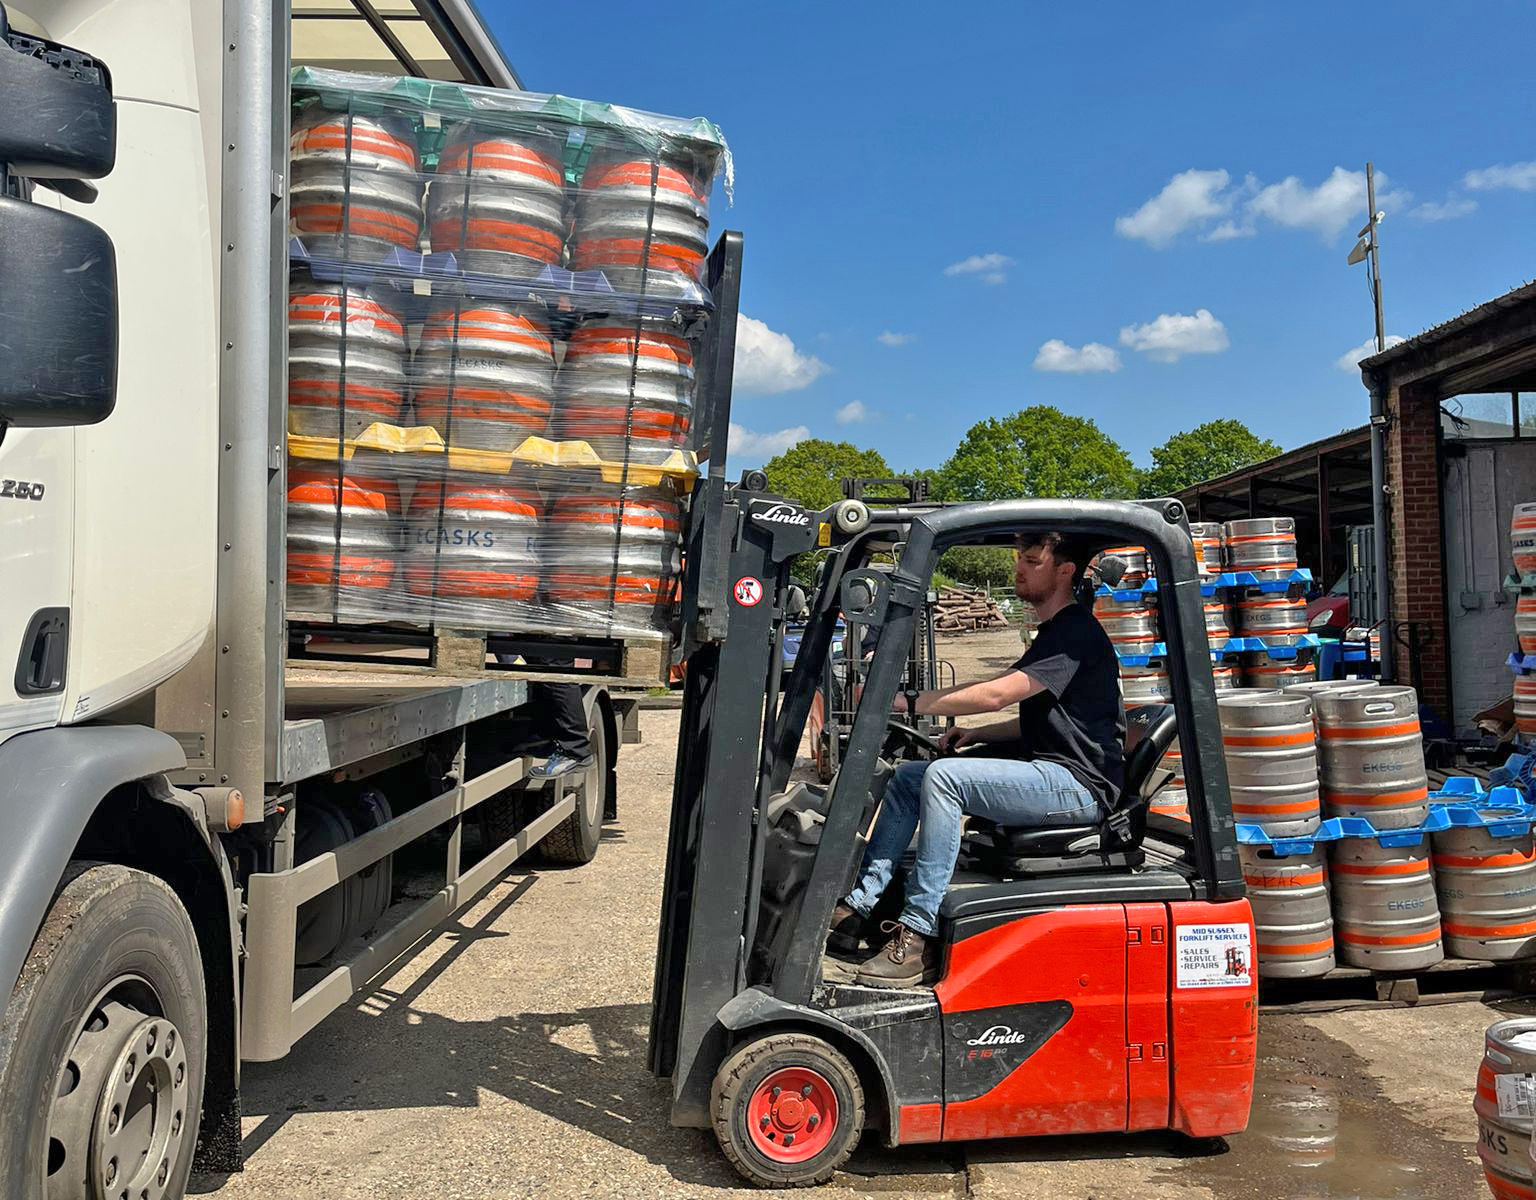 Three Acre beer leaves the brewery, destined for over 20 outlets across Sweden - picture contributed